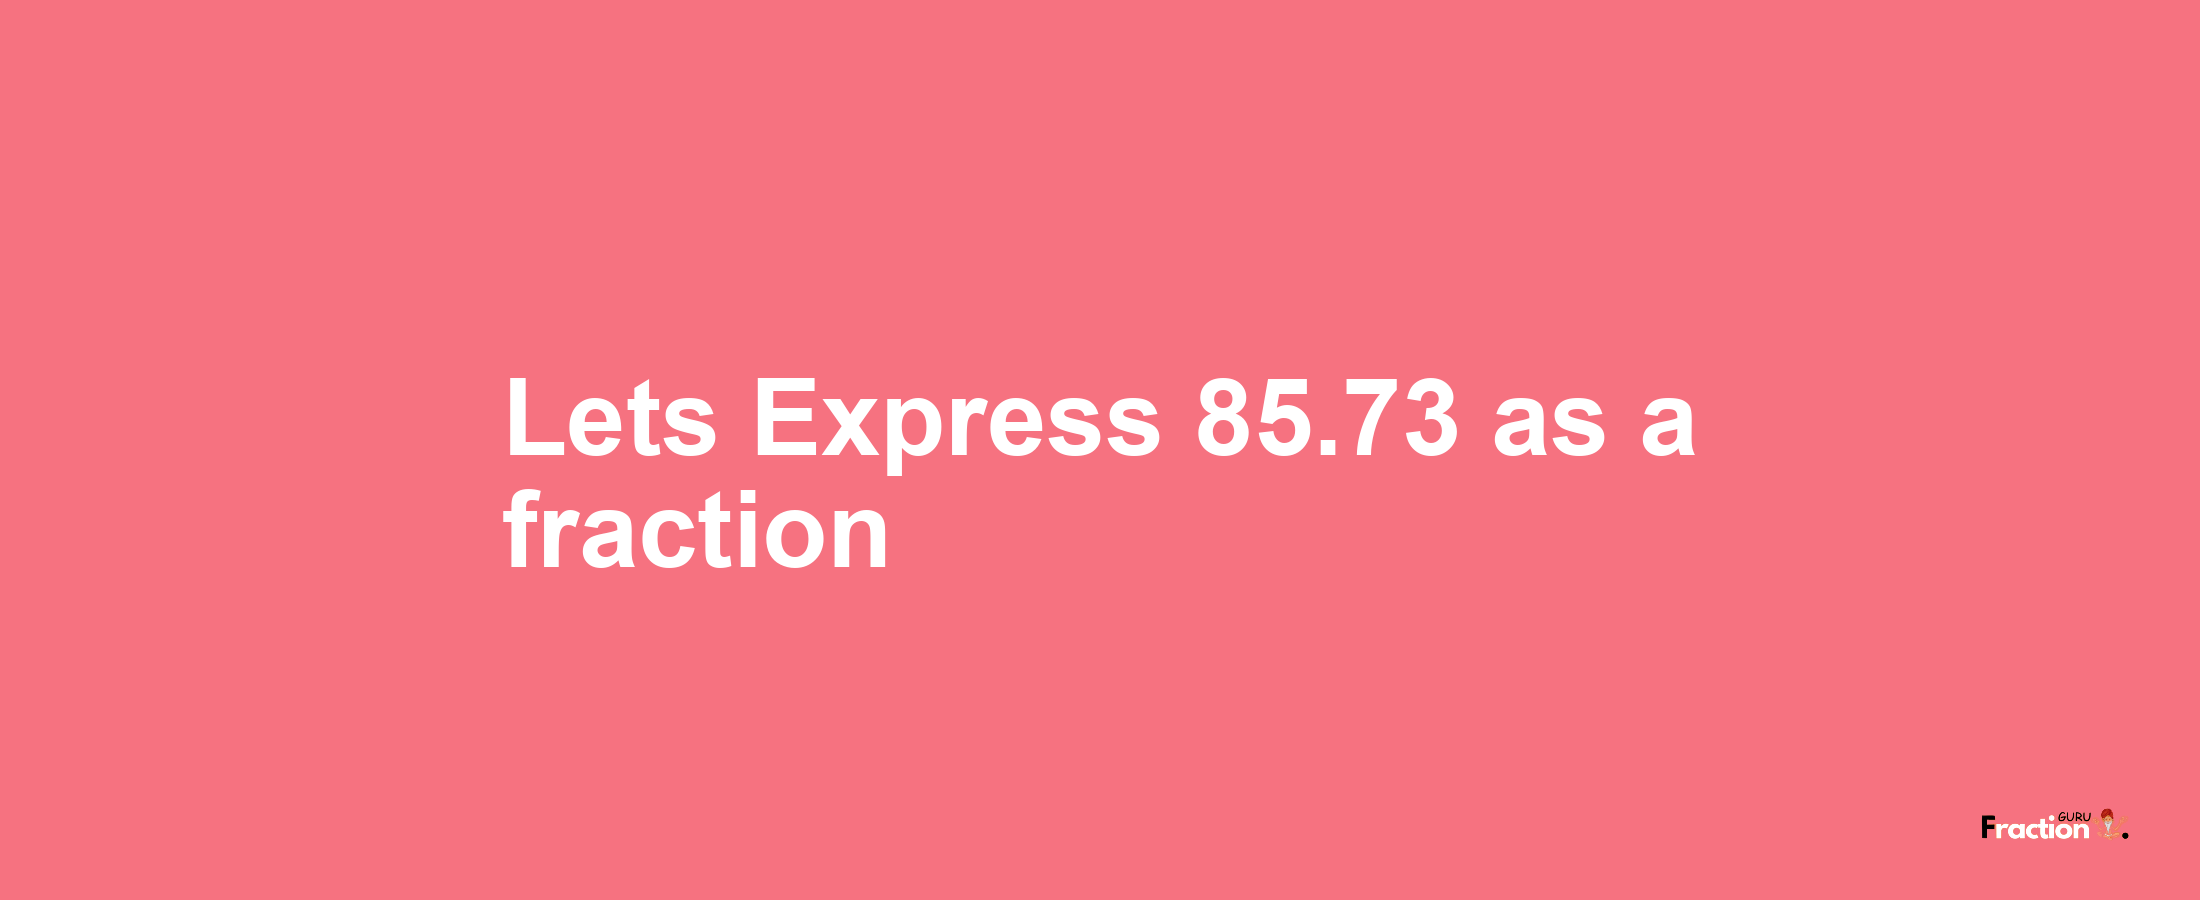 Lets Express 85.73 as afraction